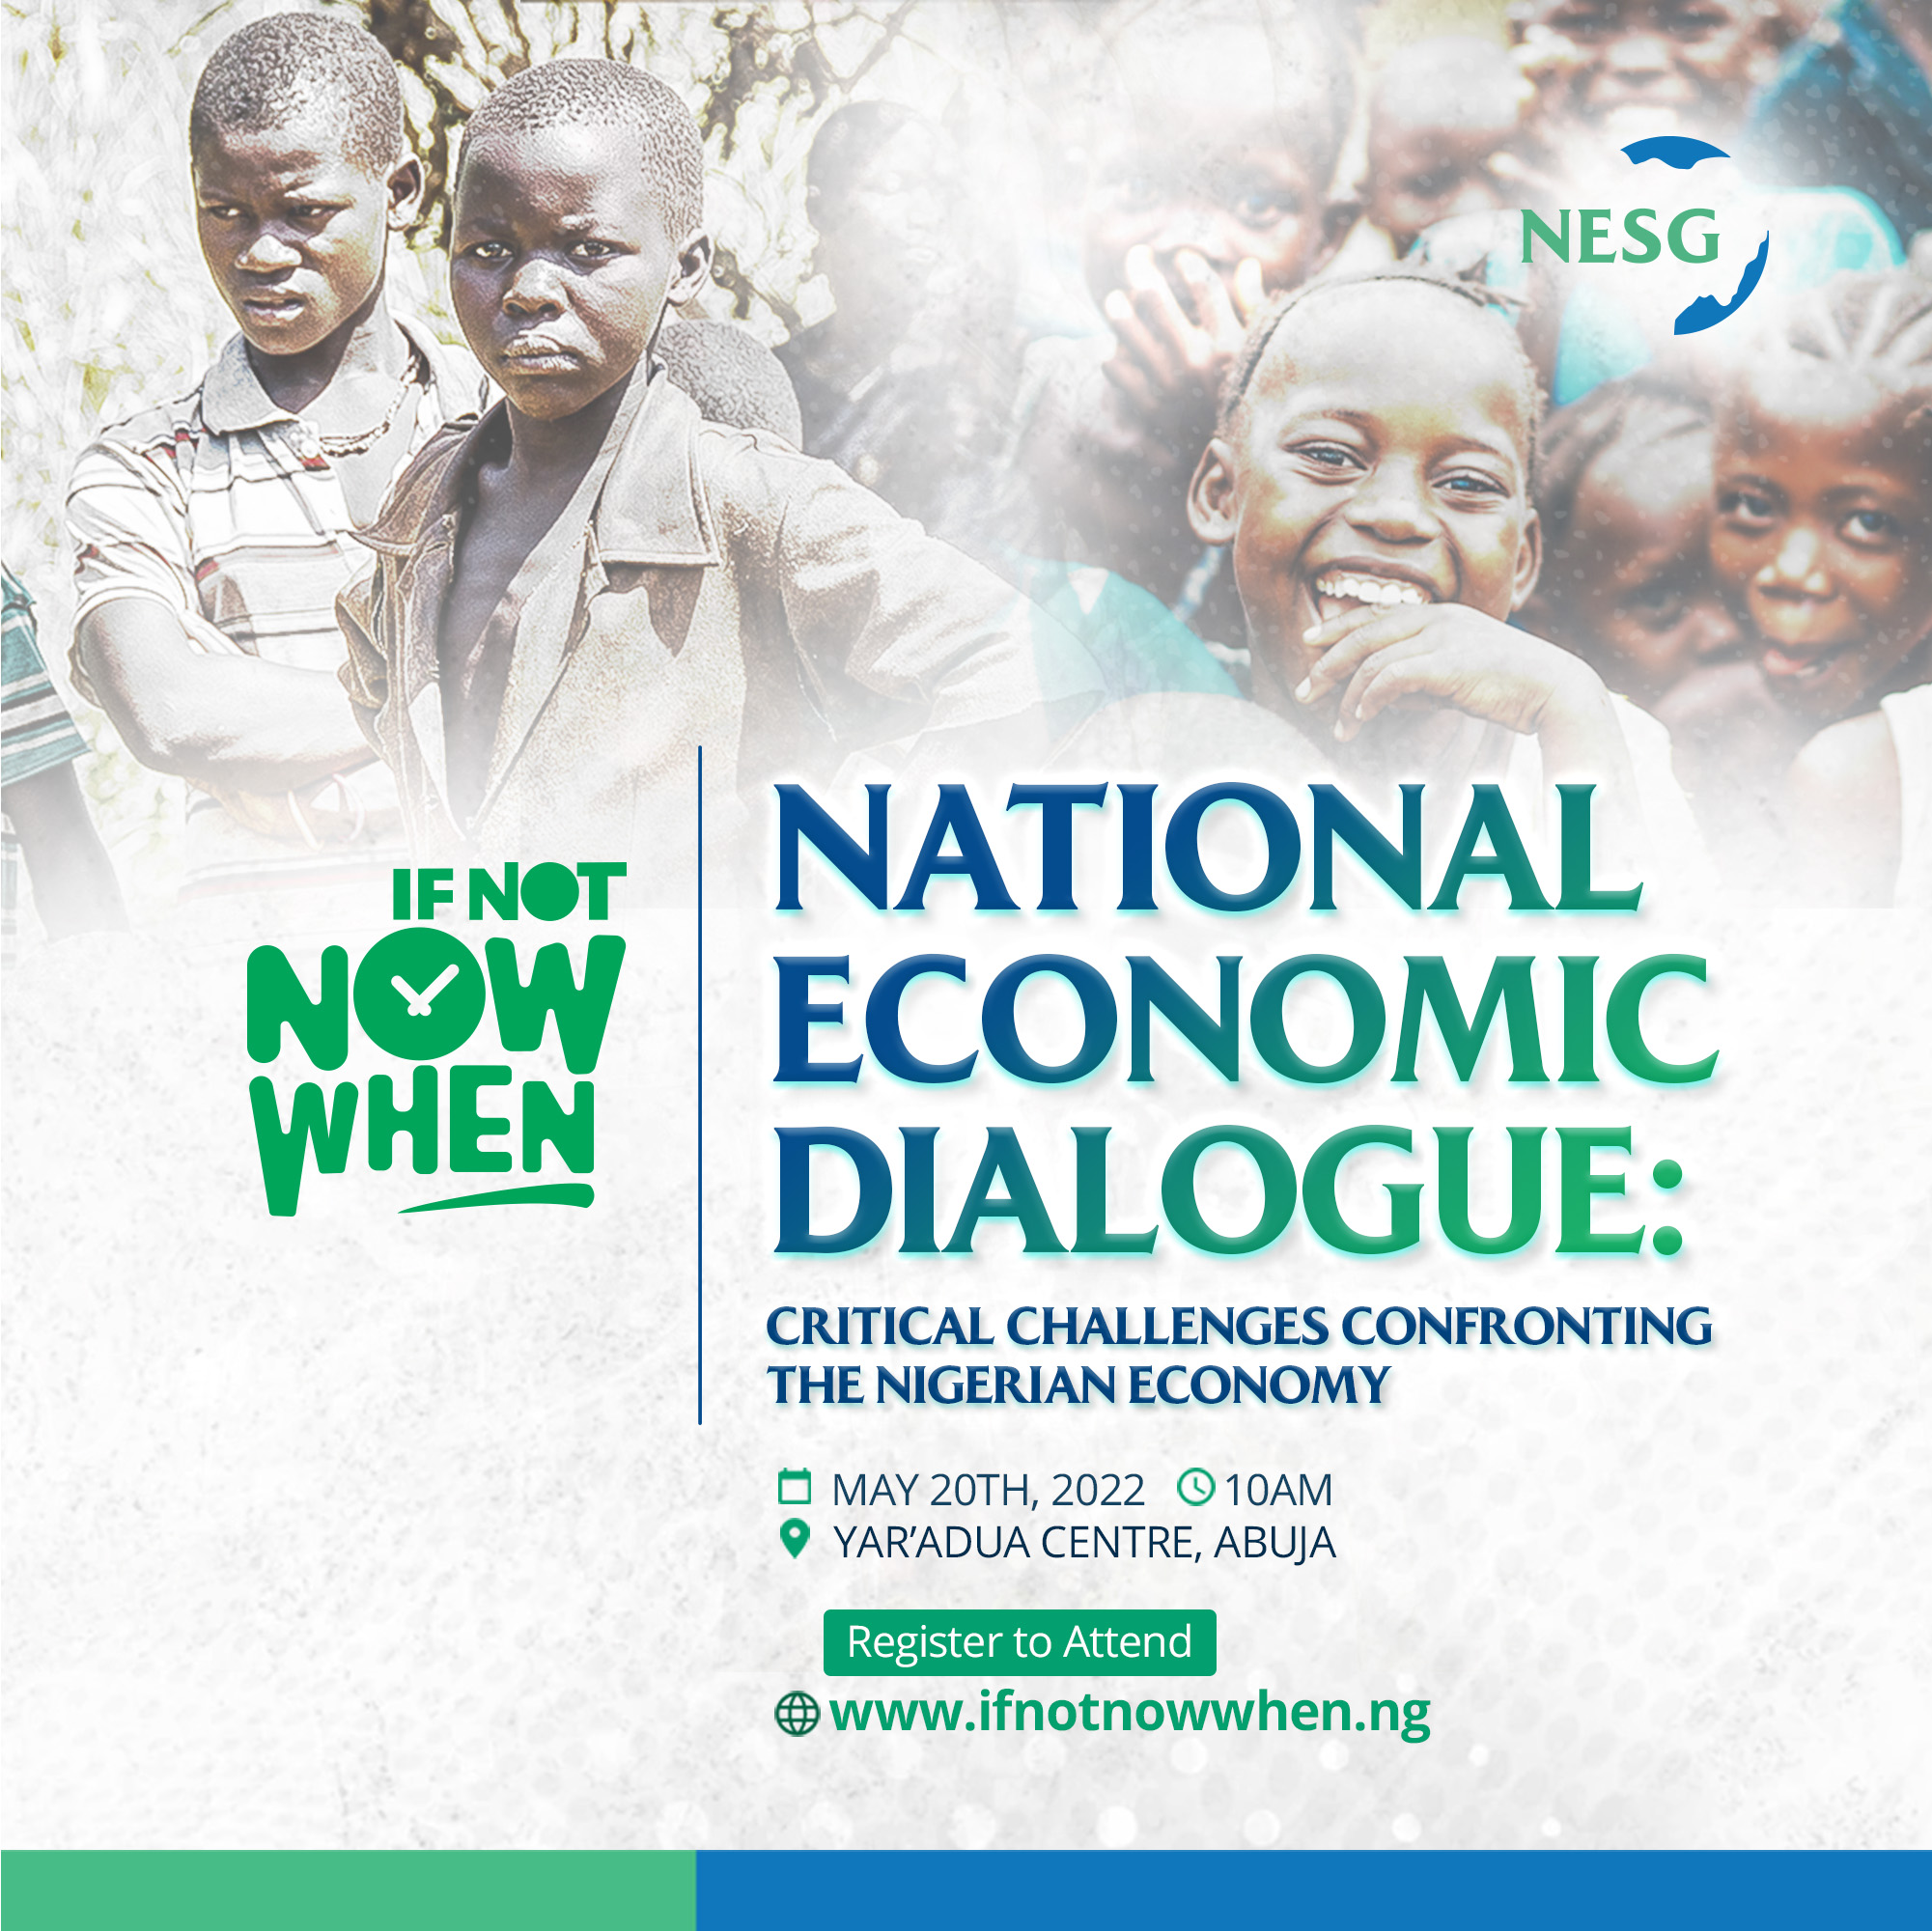 NESG to hold National Economic Dialogue to confront the Critical Challenges Confronting the Nigerian Economy, The Nigerian Economic Summit Group, The NESG, think-tank, think, tank, nigeria, policy, nesg, africa, number one think in africa, best think in nigeria, the best think tank in africa, top 10 think tanks in nigeria, think tank nigeria, economy, business, PPD, public, private, dialogue, Nigeria, Nigeria PPD, NIGERIA, PPD